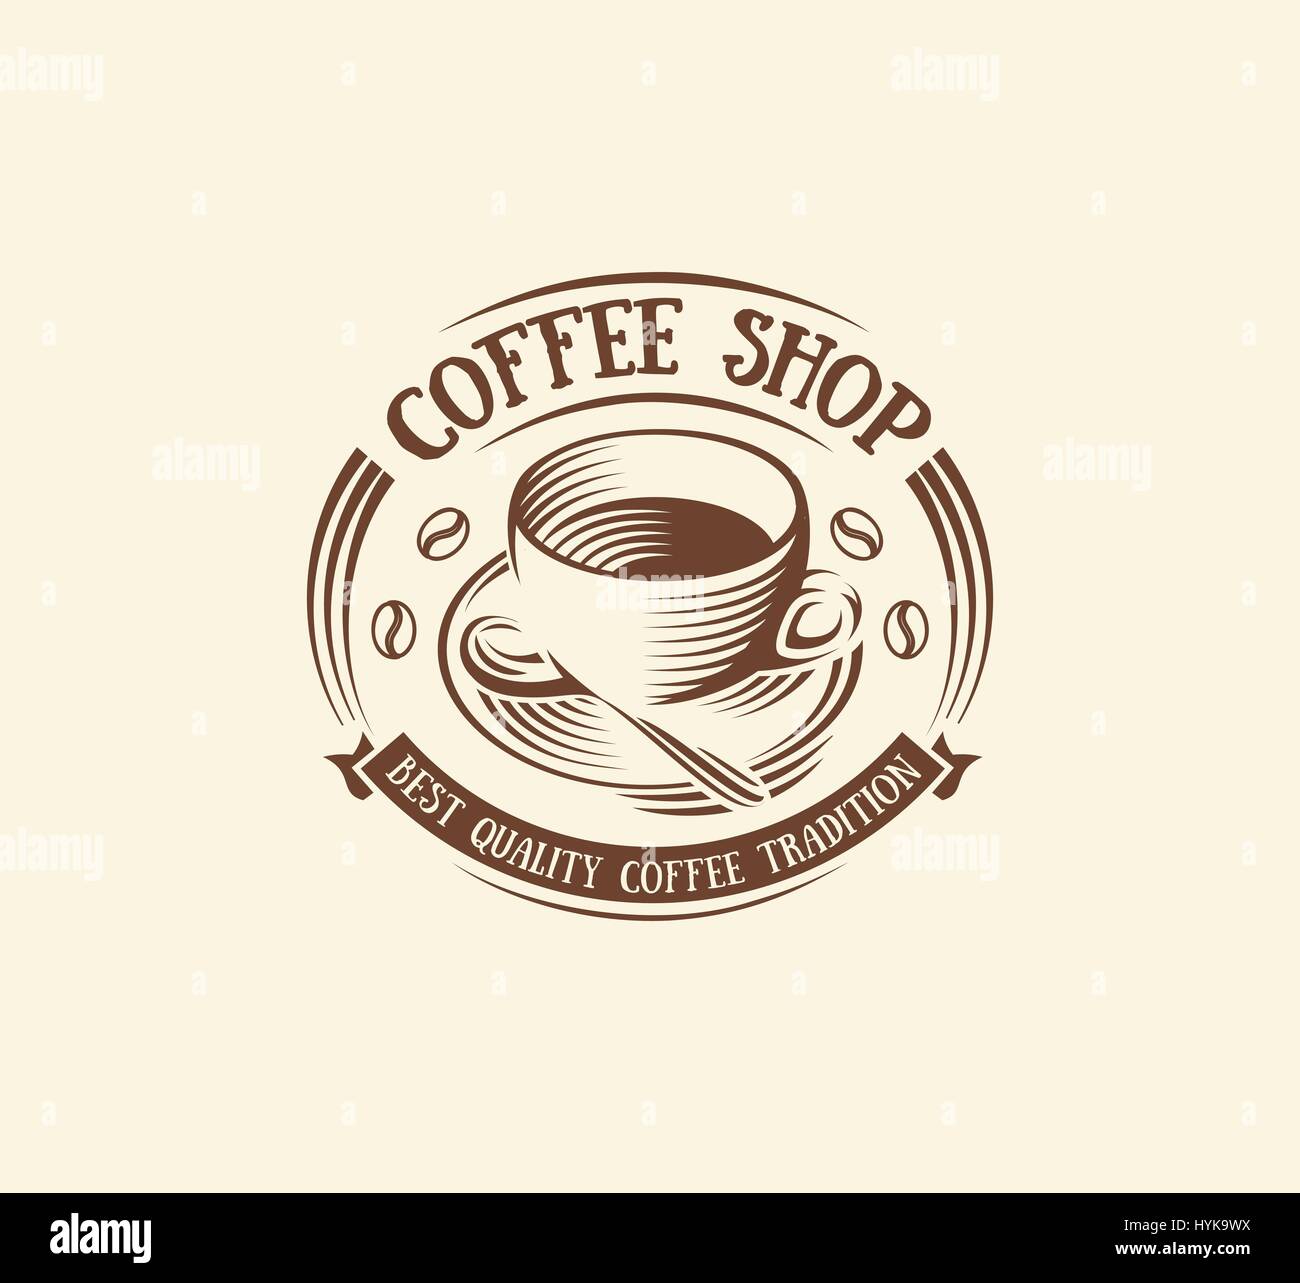 https://c8.alamy.com/comp/HYK9WX/isolated-abstract-brown-color-coffee-cup-logo-morning-drink-logotypecafe-HYK9WX.jpg